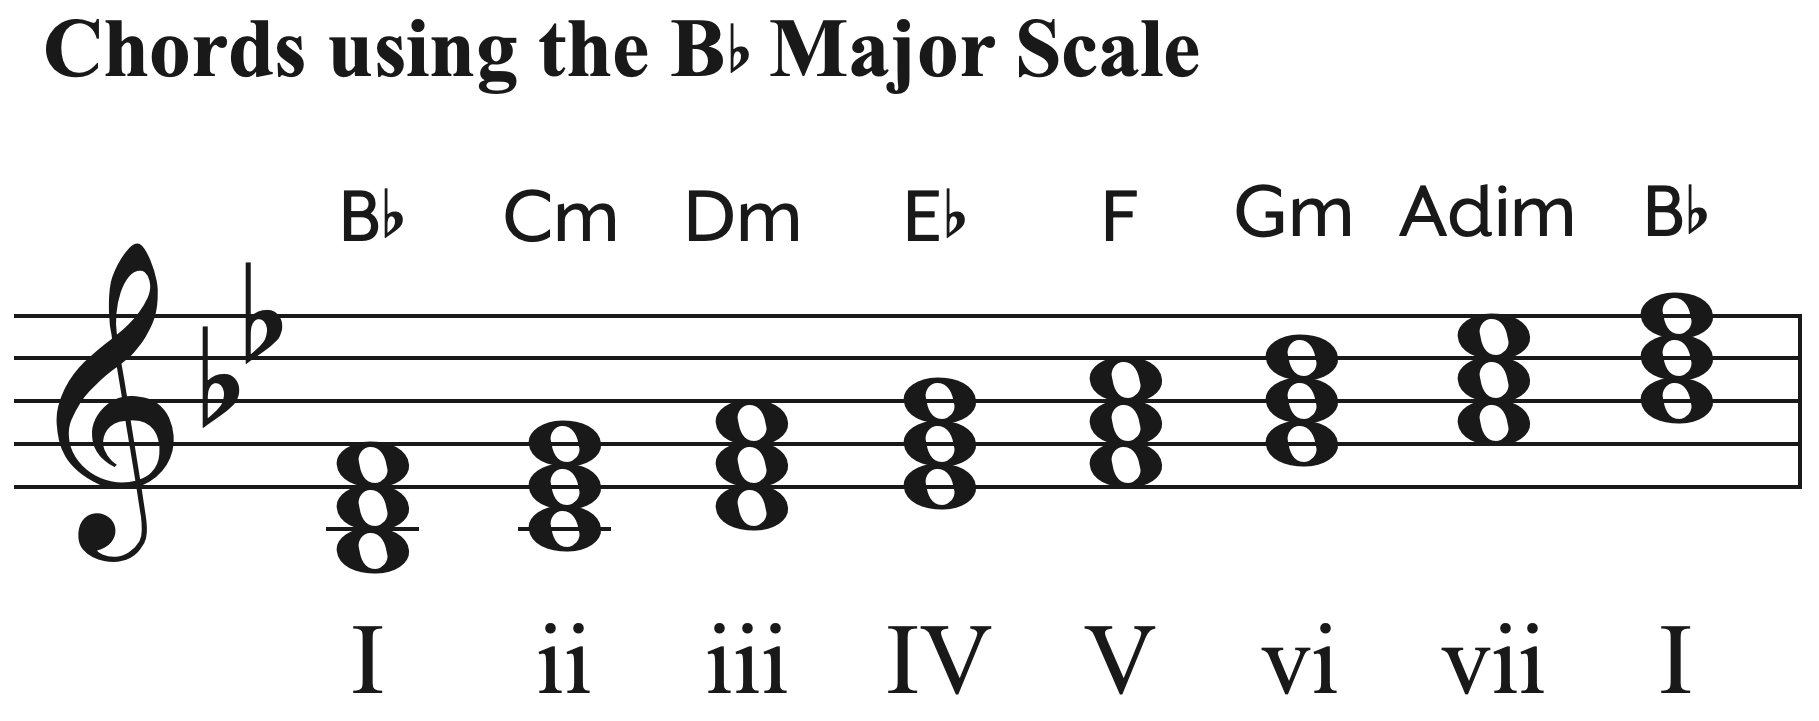 Chords using the B-flat major scale